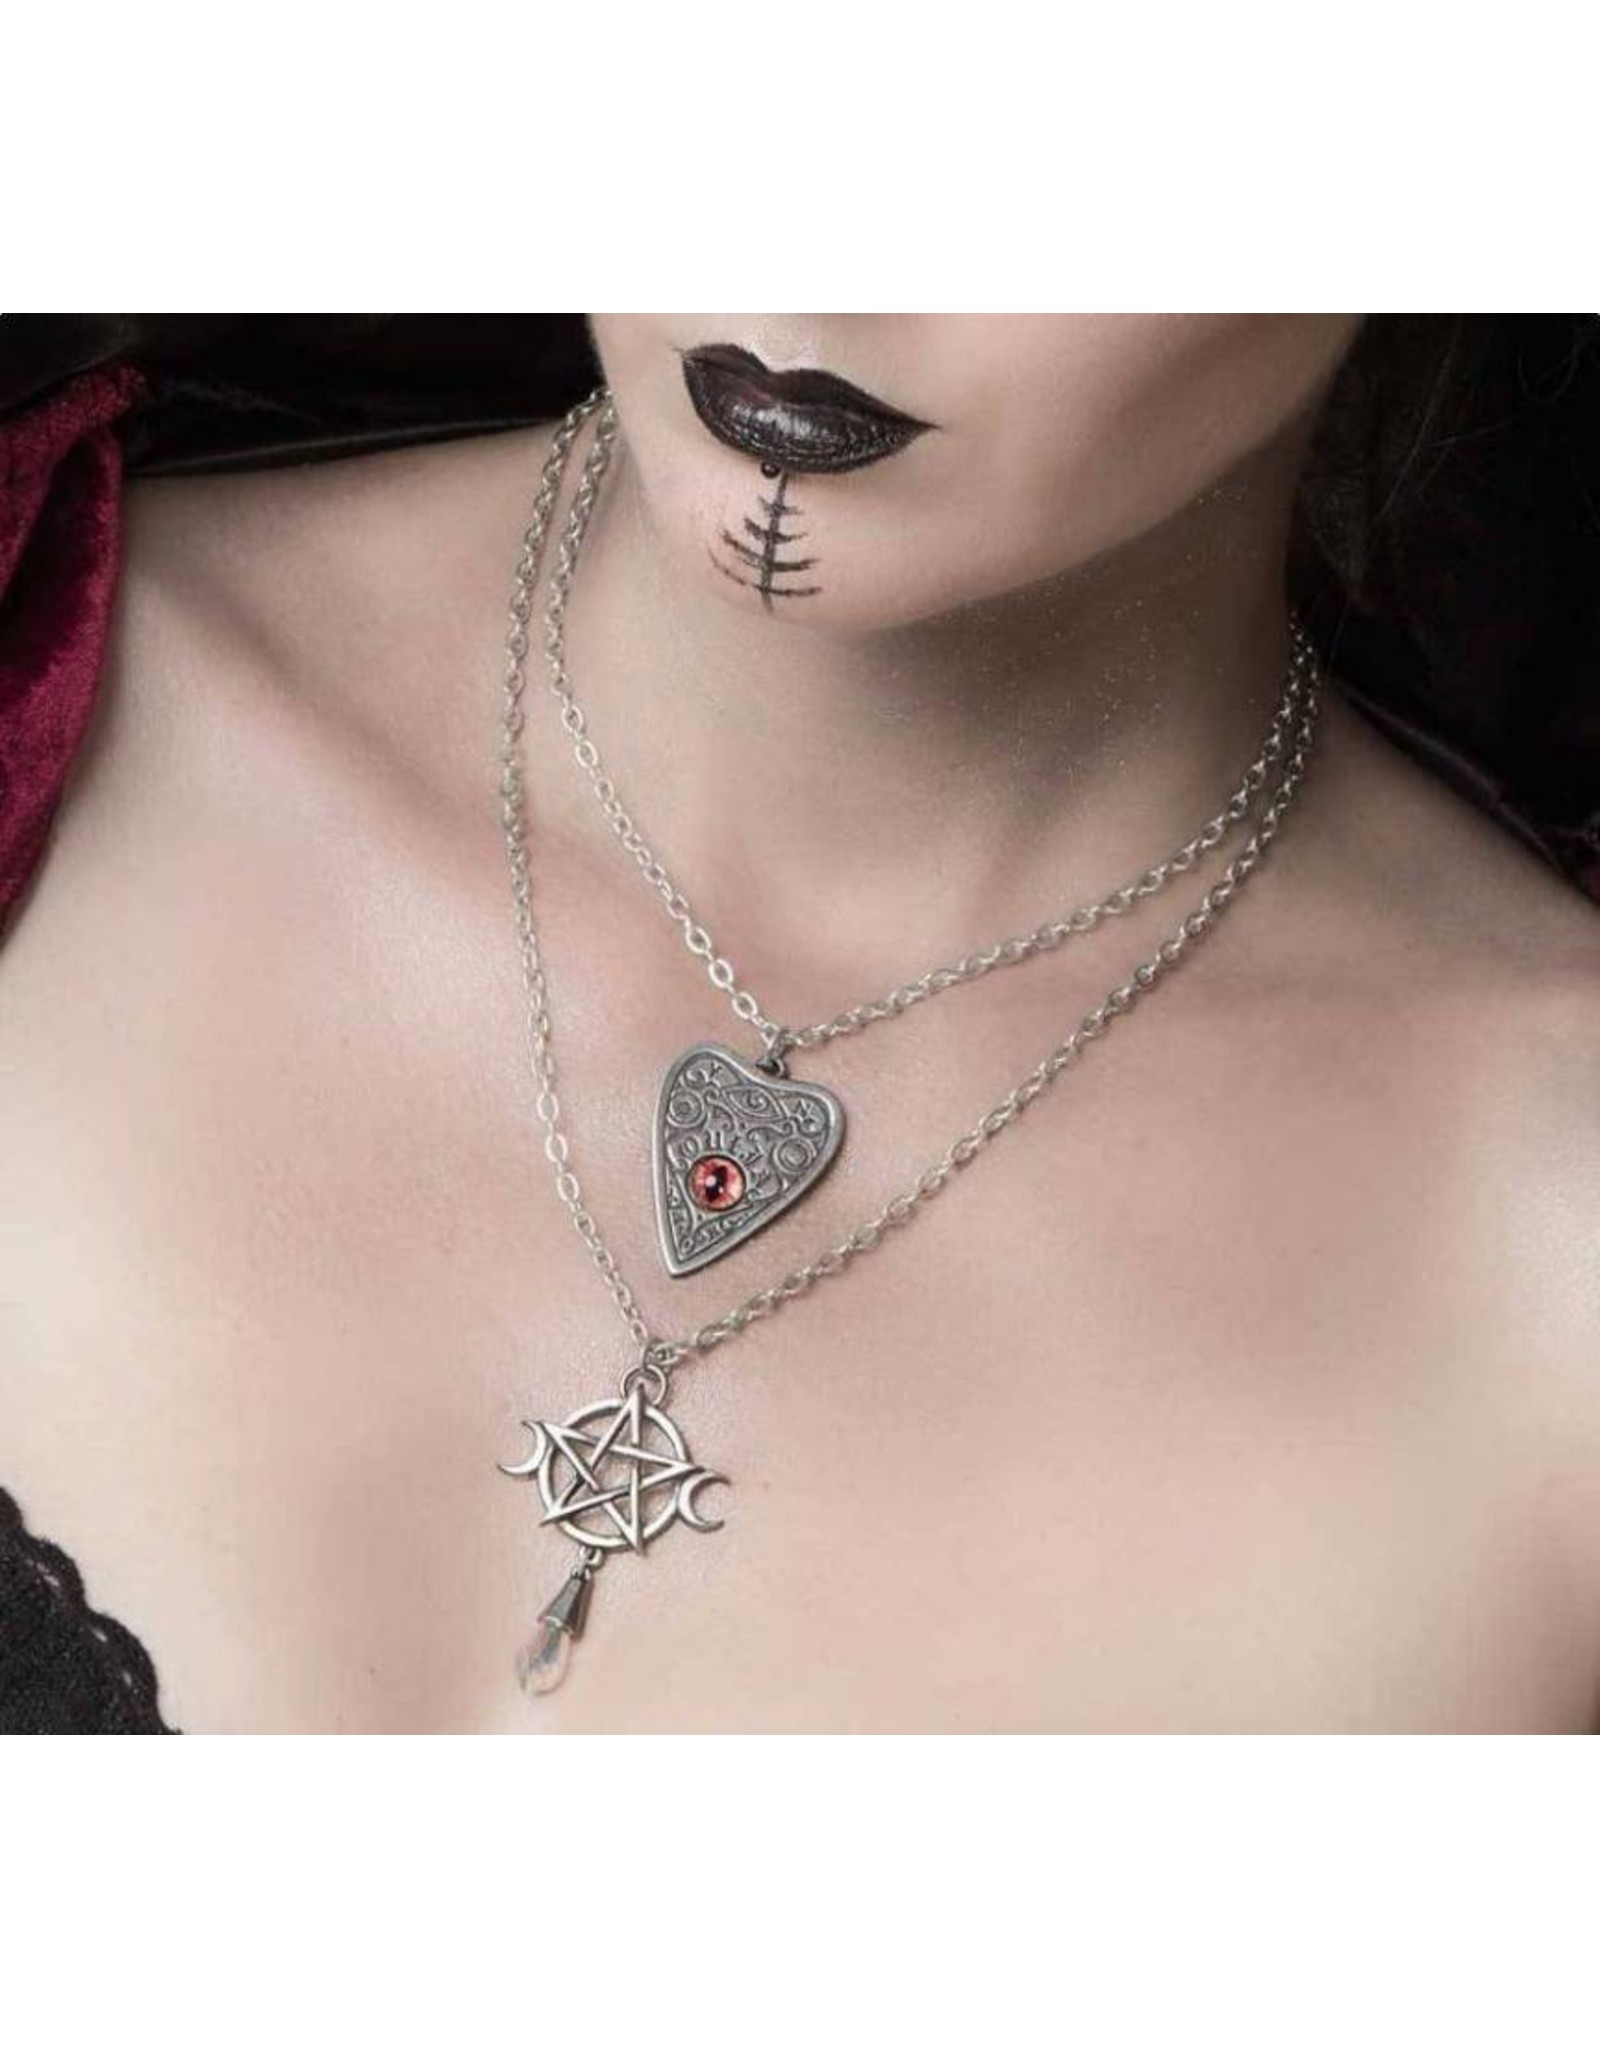 Alchemy Wicca and occult jewellery - Petit Ouija pendant and chain Alchemy